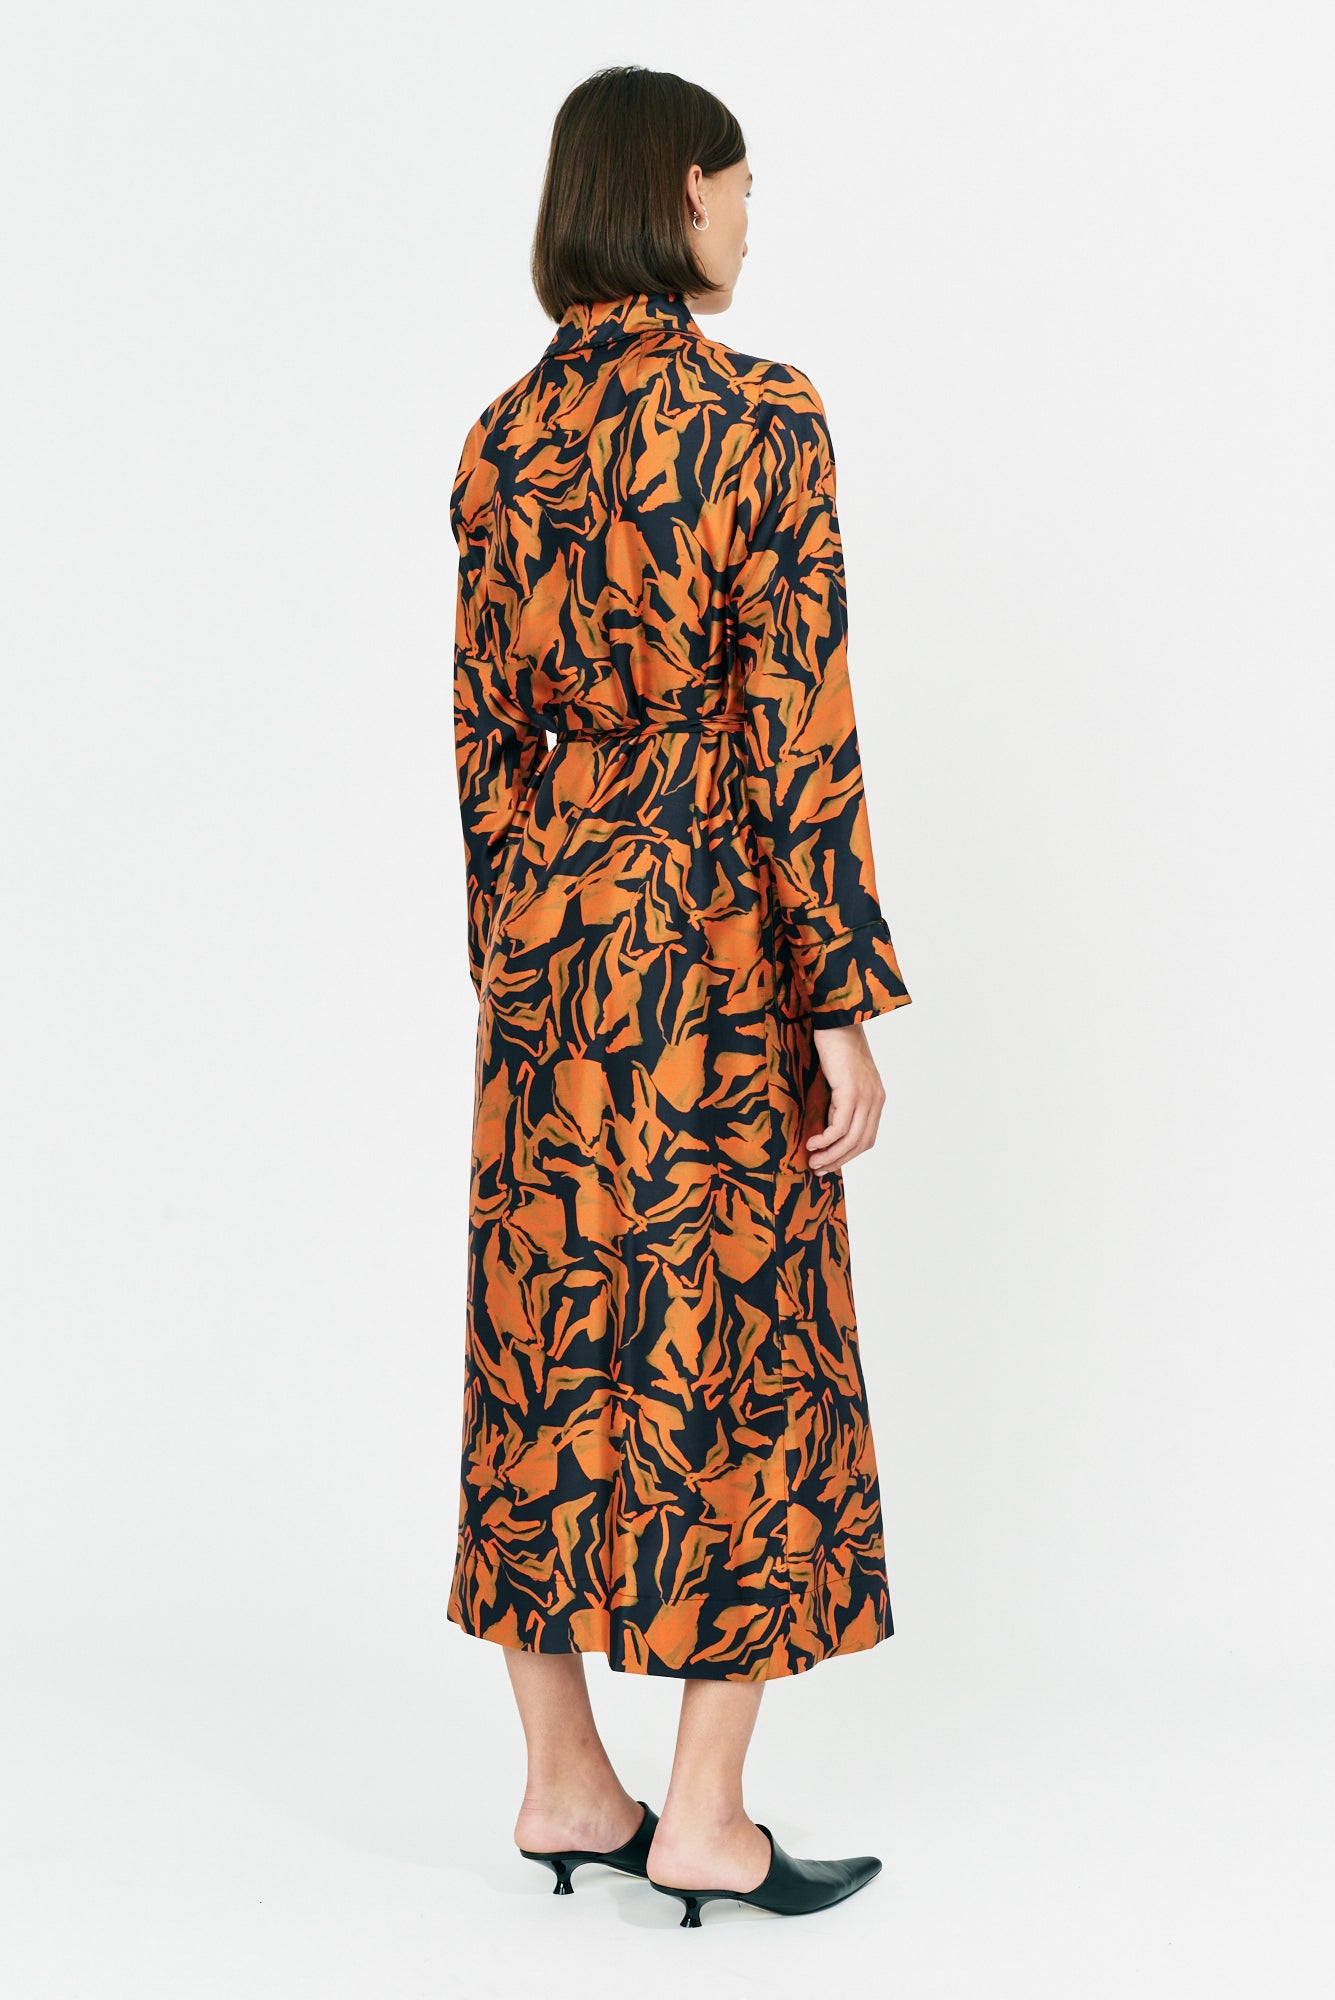 Painted Abstract Forest Vibrations Silk Print Robe Dress Full Back View